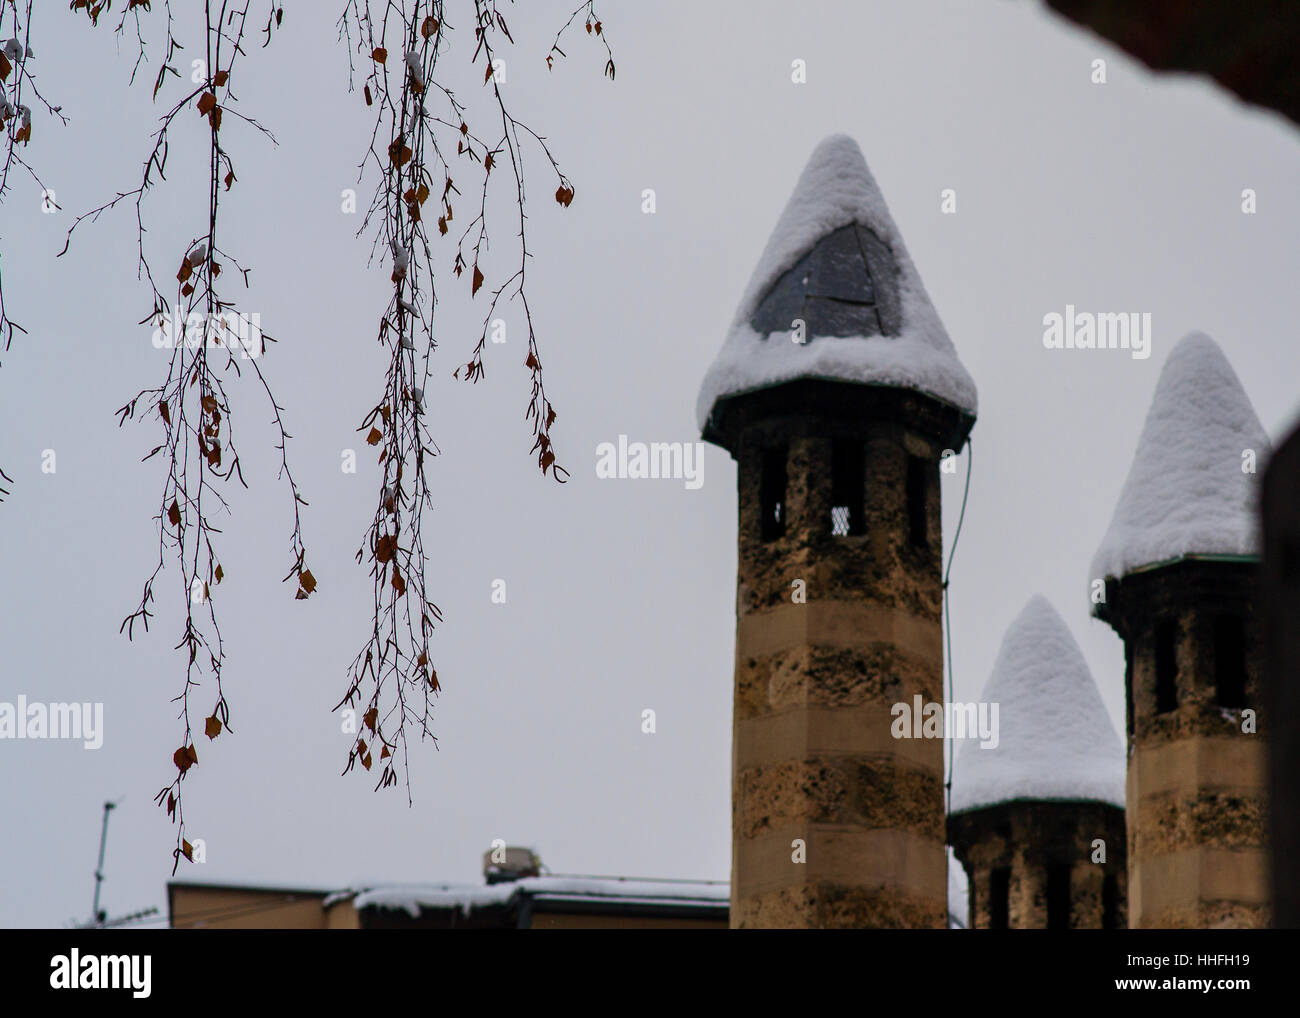 Chimney covered in snow Stock Photo